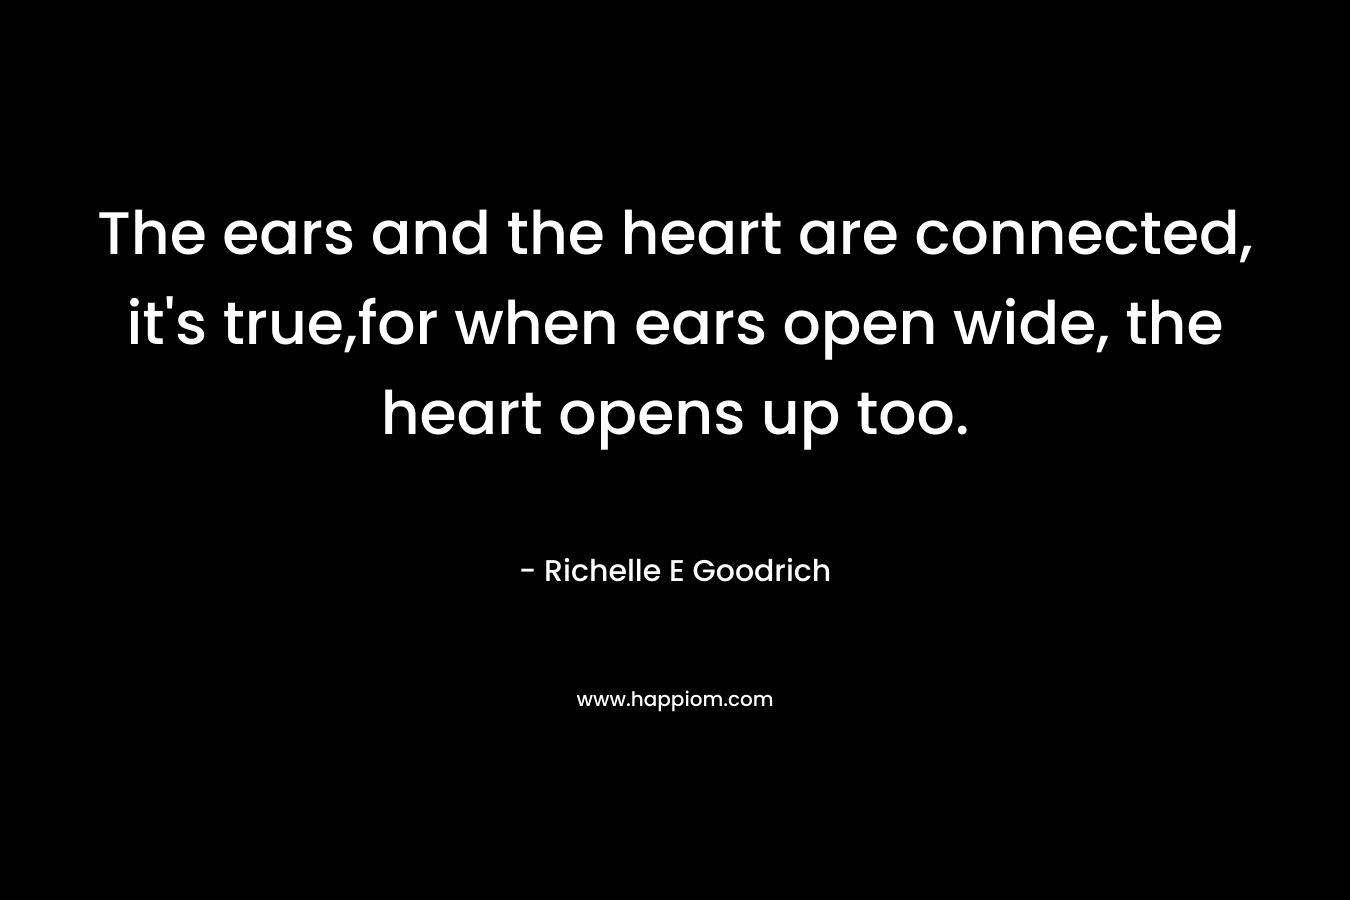 The ears and the heart are connected, it's true,for when ears open wide, the heart opens up too.